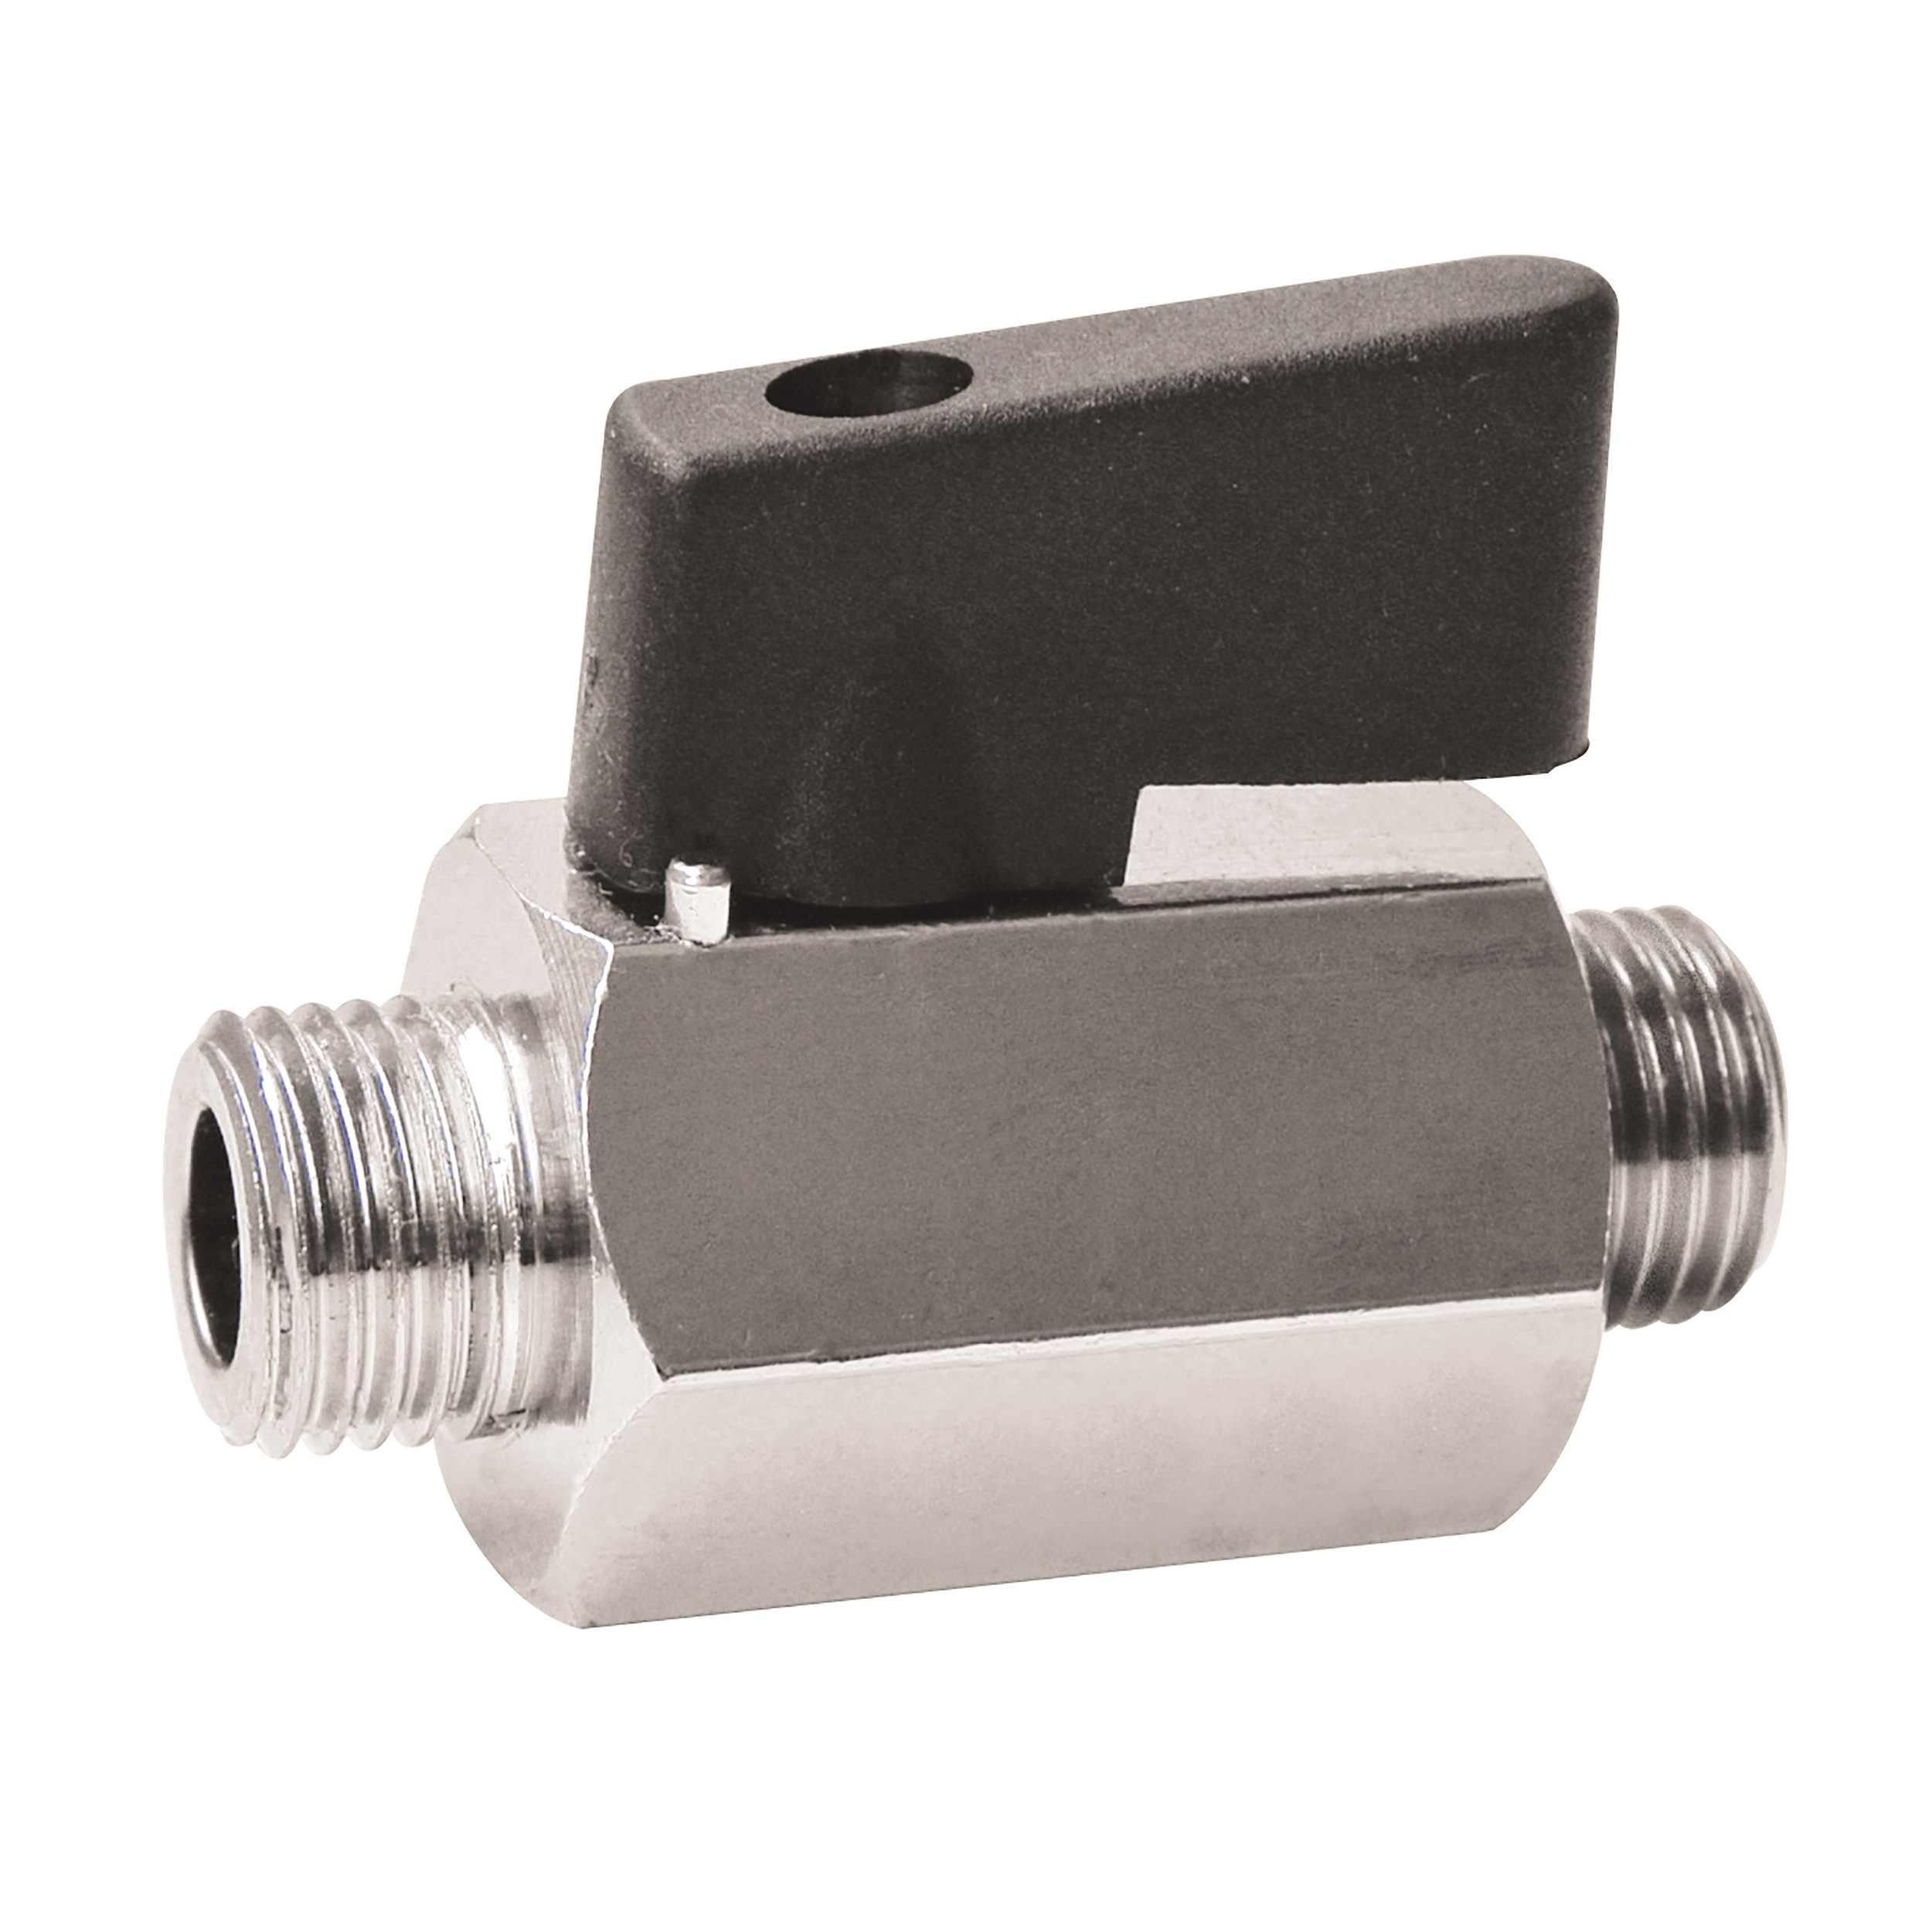 Mini ball valve, full flow, length: 42.5 mm, max. operating pressure at 90 °C: 232 psi, DN 8, connection thread: G⅜ male–male